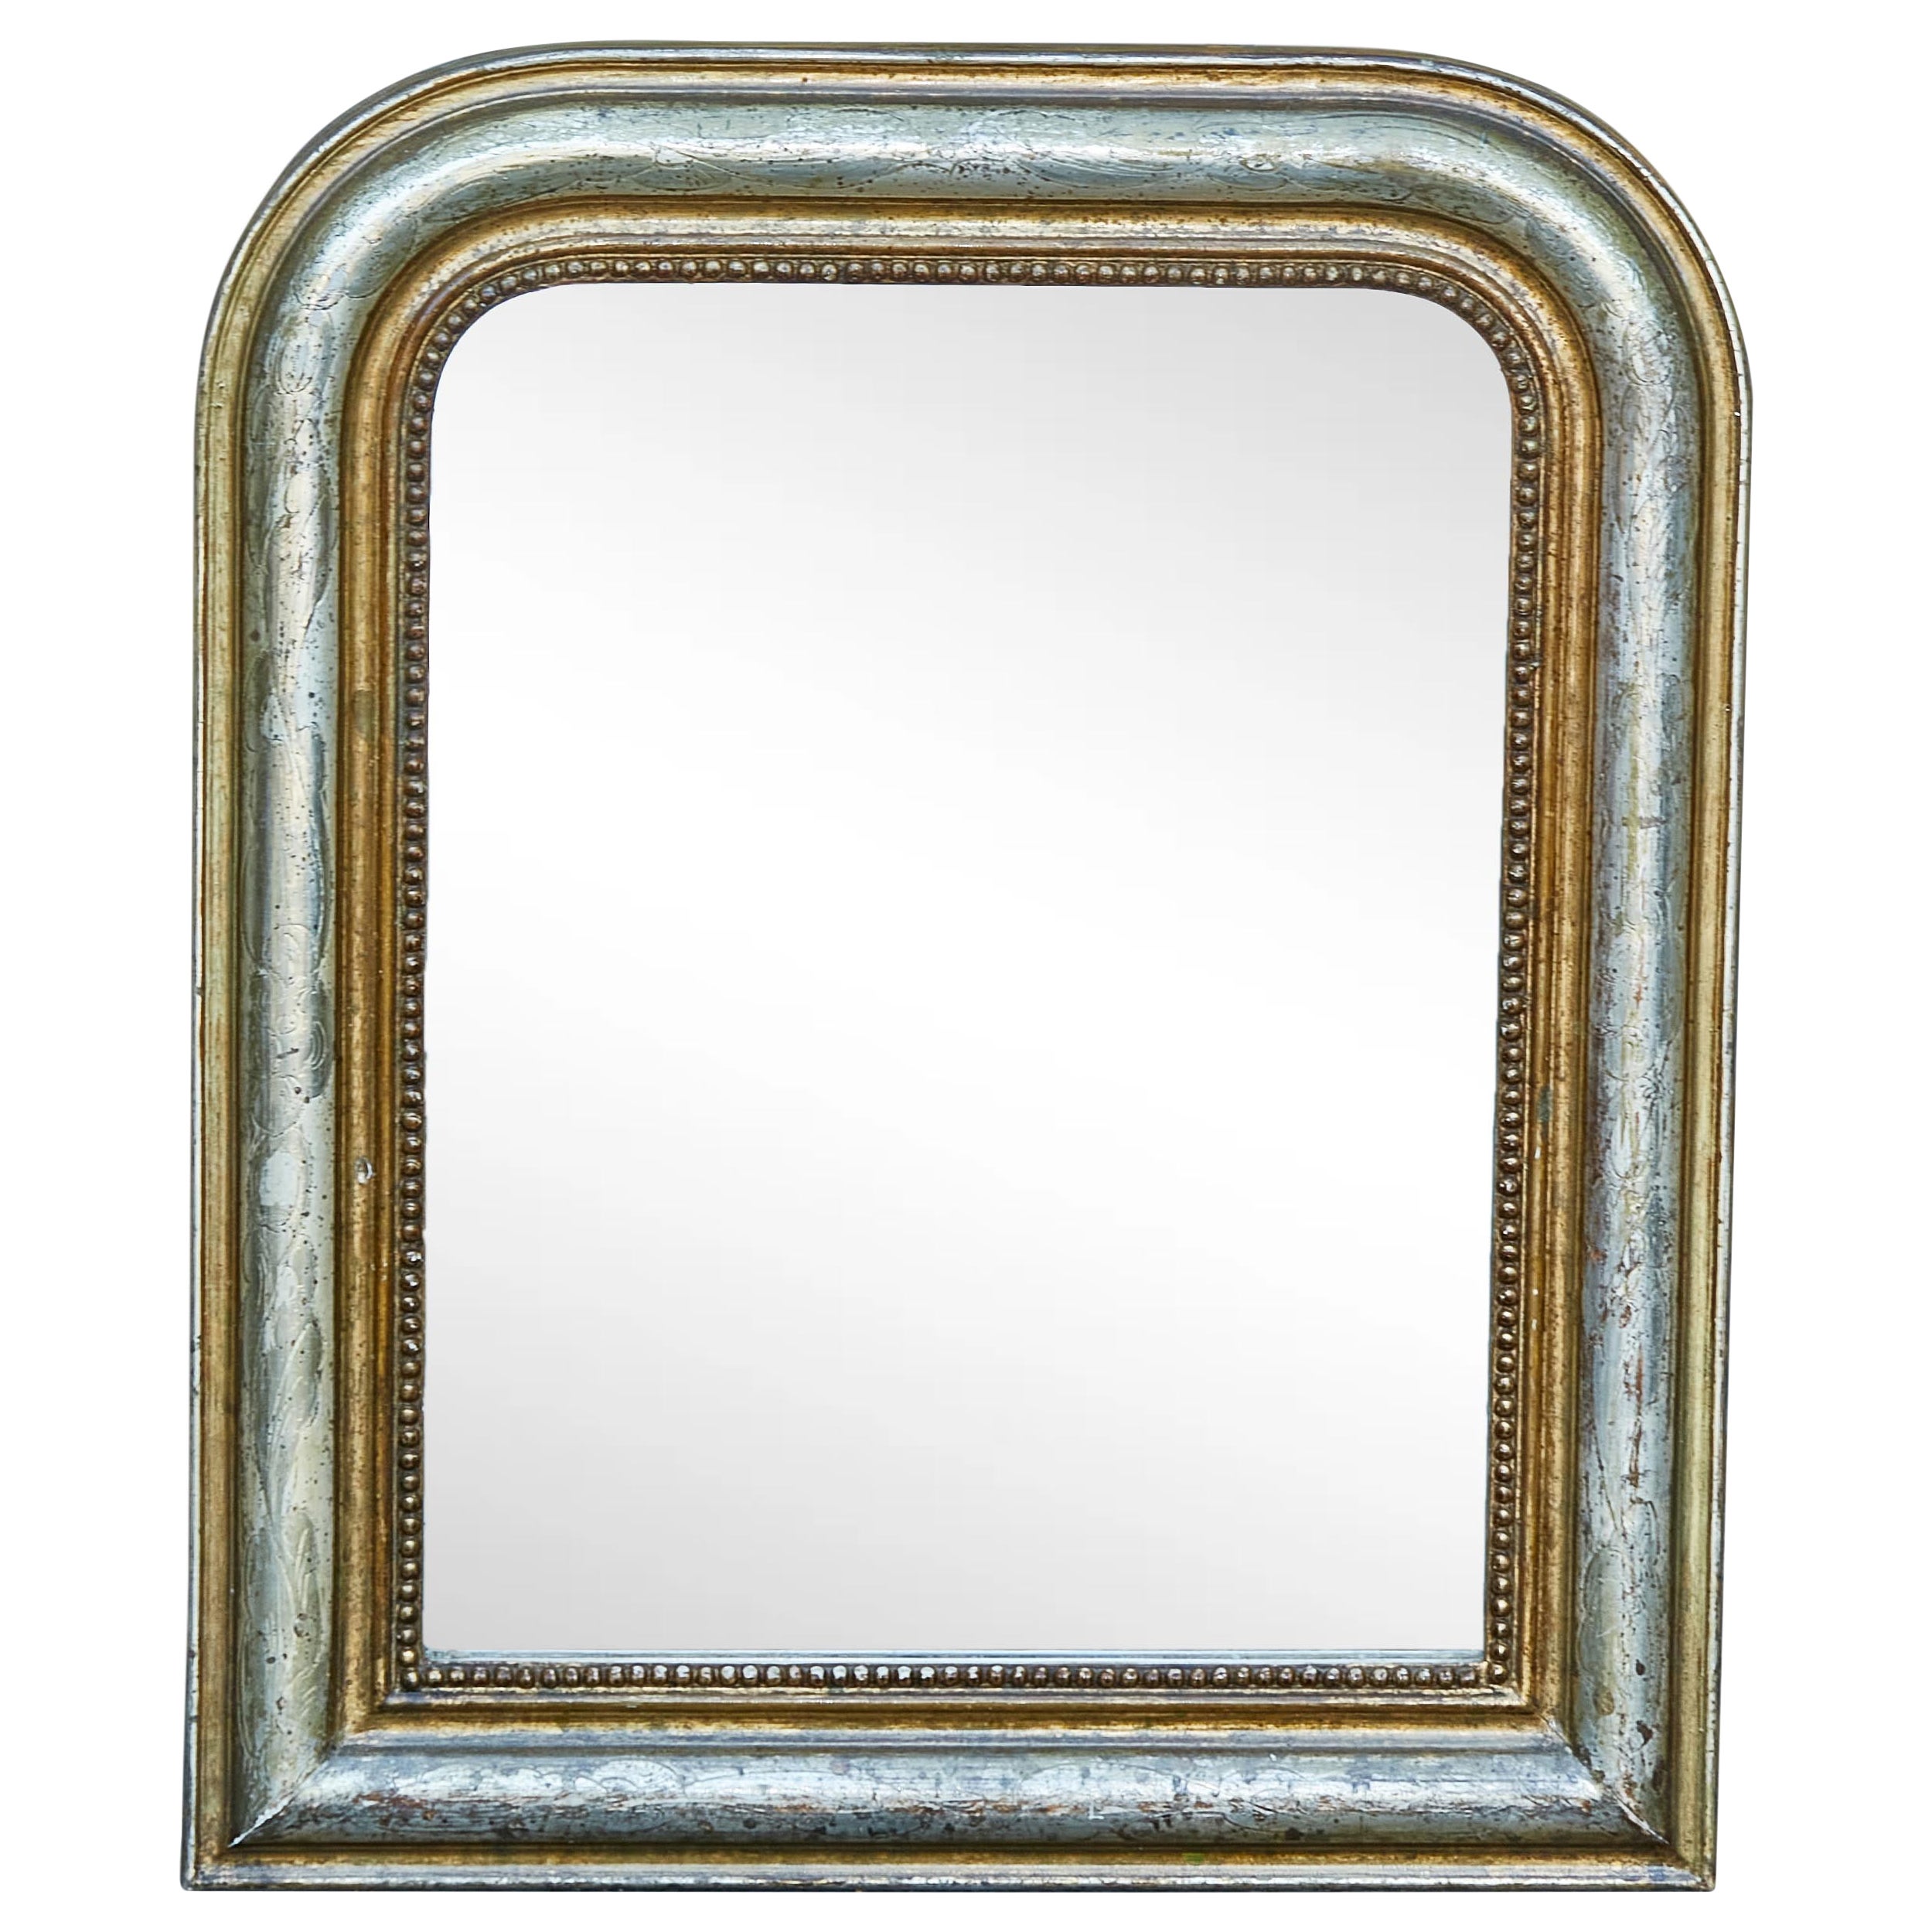 French Louis-Philippe 19th Century Silver and Gold Mirror with Petite Beads